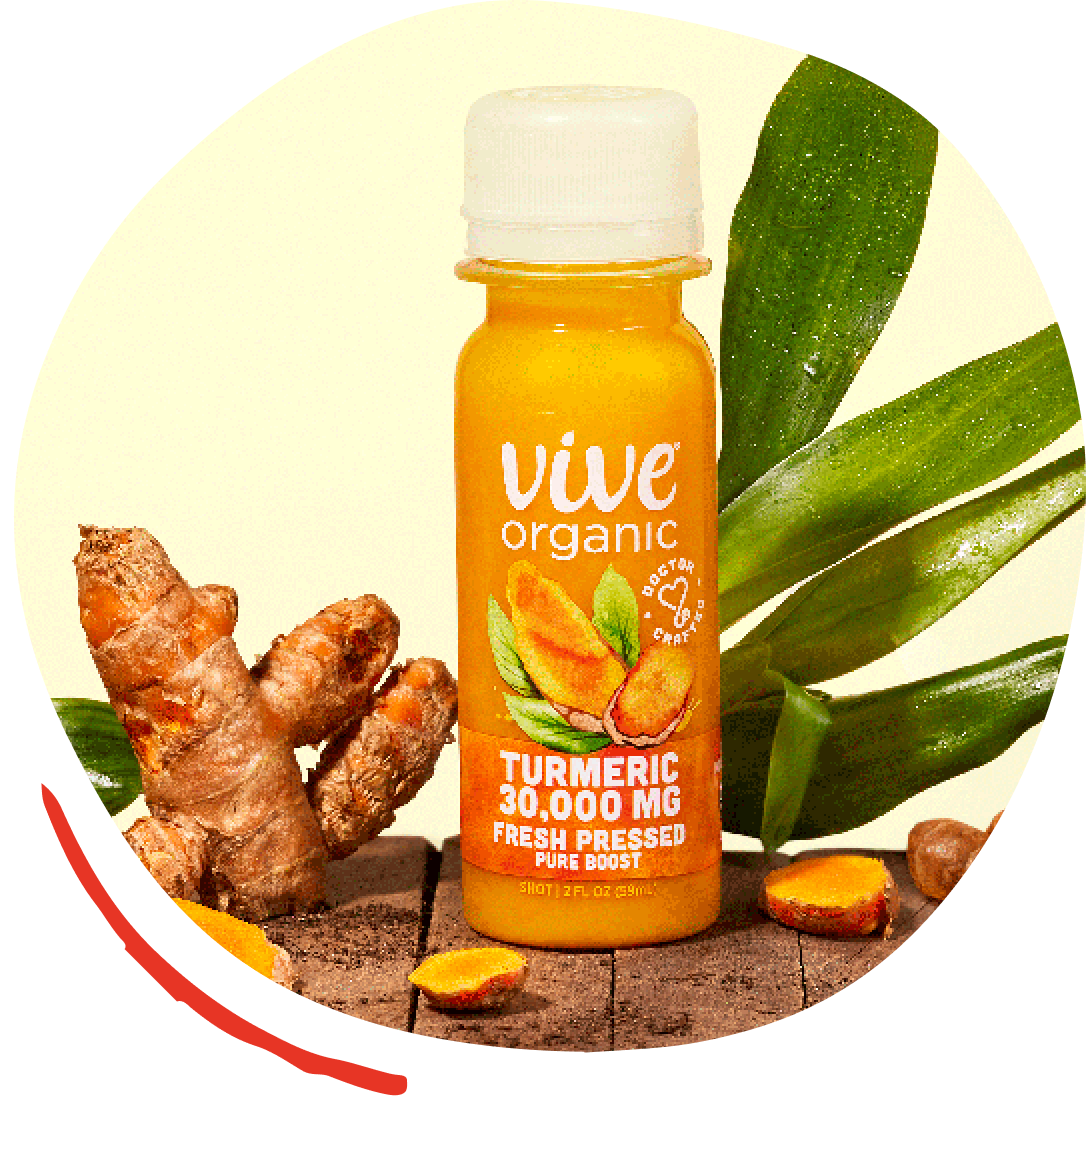 Vive Organic Turmeric bottle surrounded by fresh turmeric and other ingredients